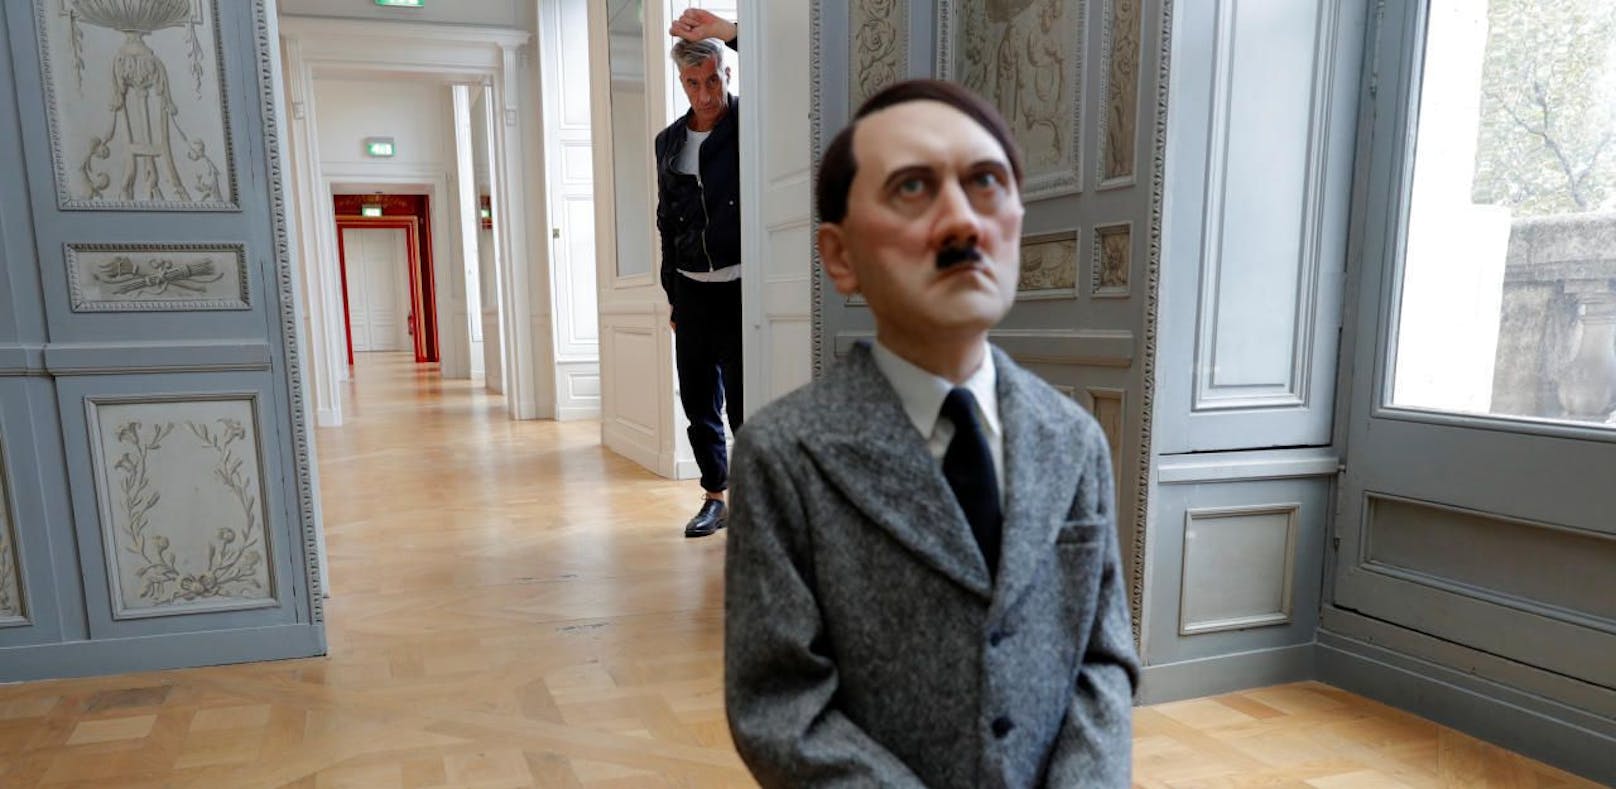 Italian artist Maurizio Cattelan poses with his creation &quot;Him&quot; (2001) prior to the opening of the exhibition &quot;Not Afraid of Love&quot; at the Hotel de la Monnaie in Paris, France, October 17, 2016. REUTERS/Philippe Wojazer - RTX2P6LN